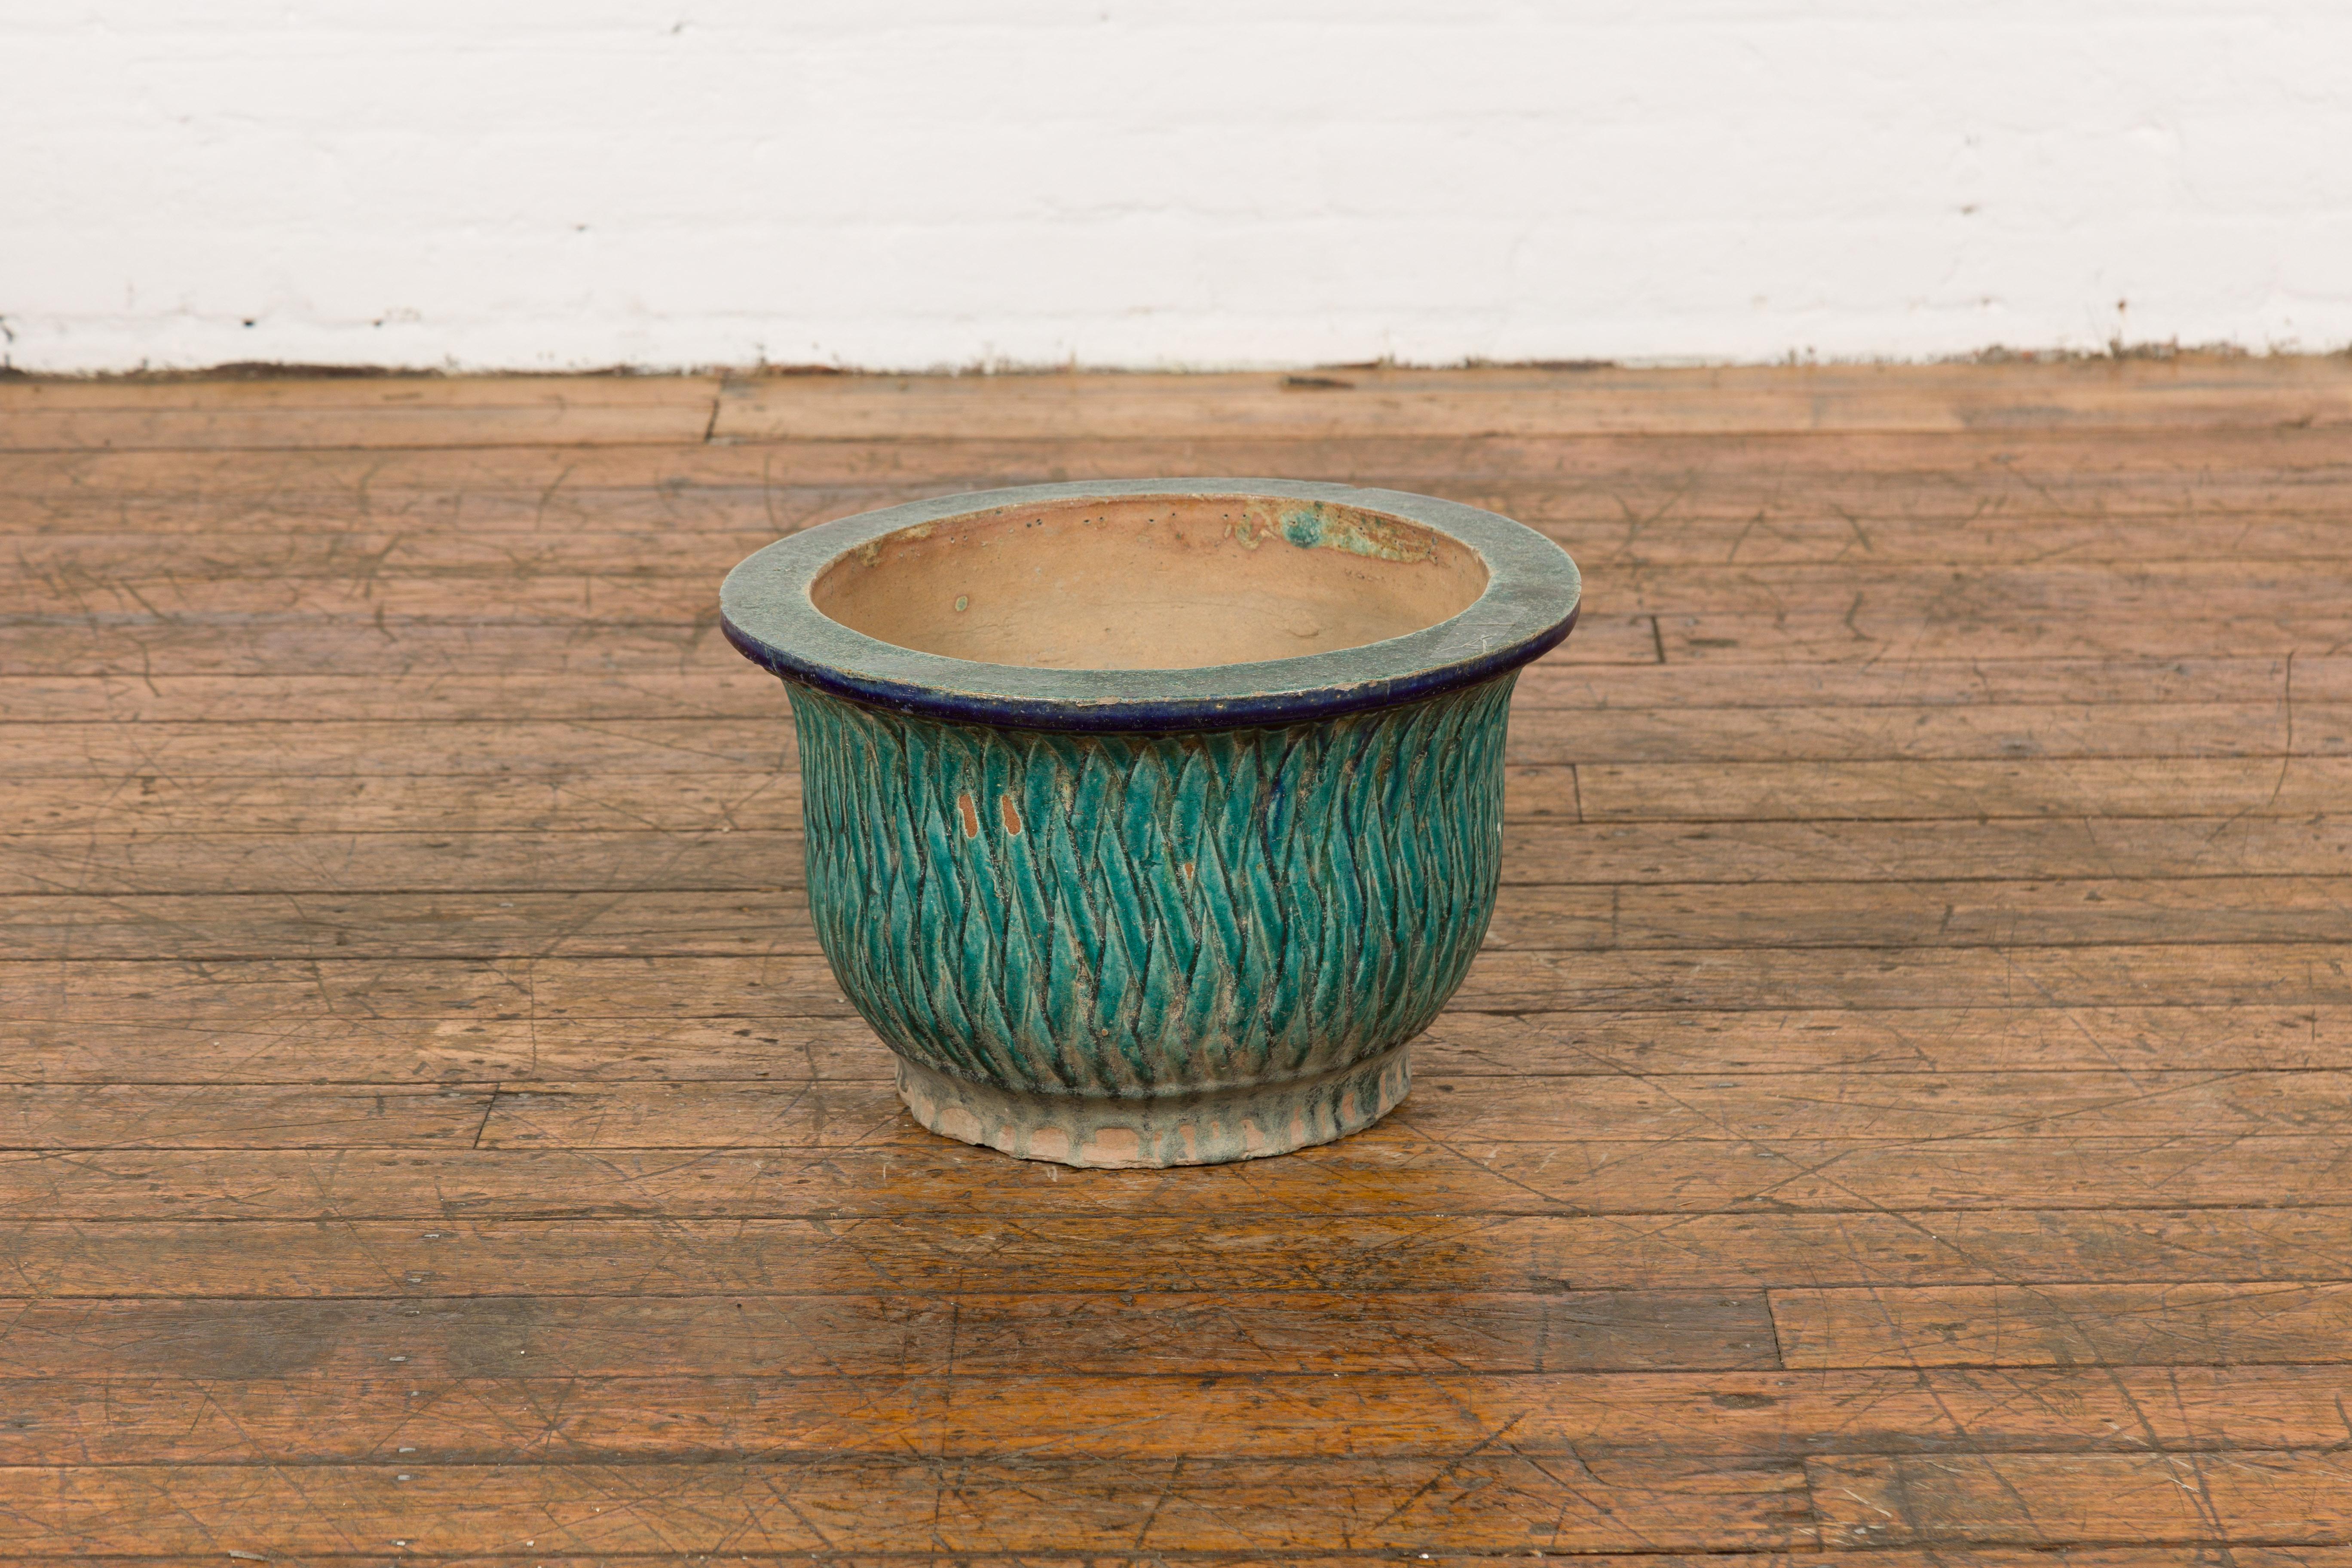 Multi-Glaze Planter with Green and Blue Accents, Qing Dynasty Period For Sale 4